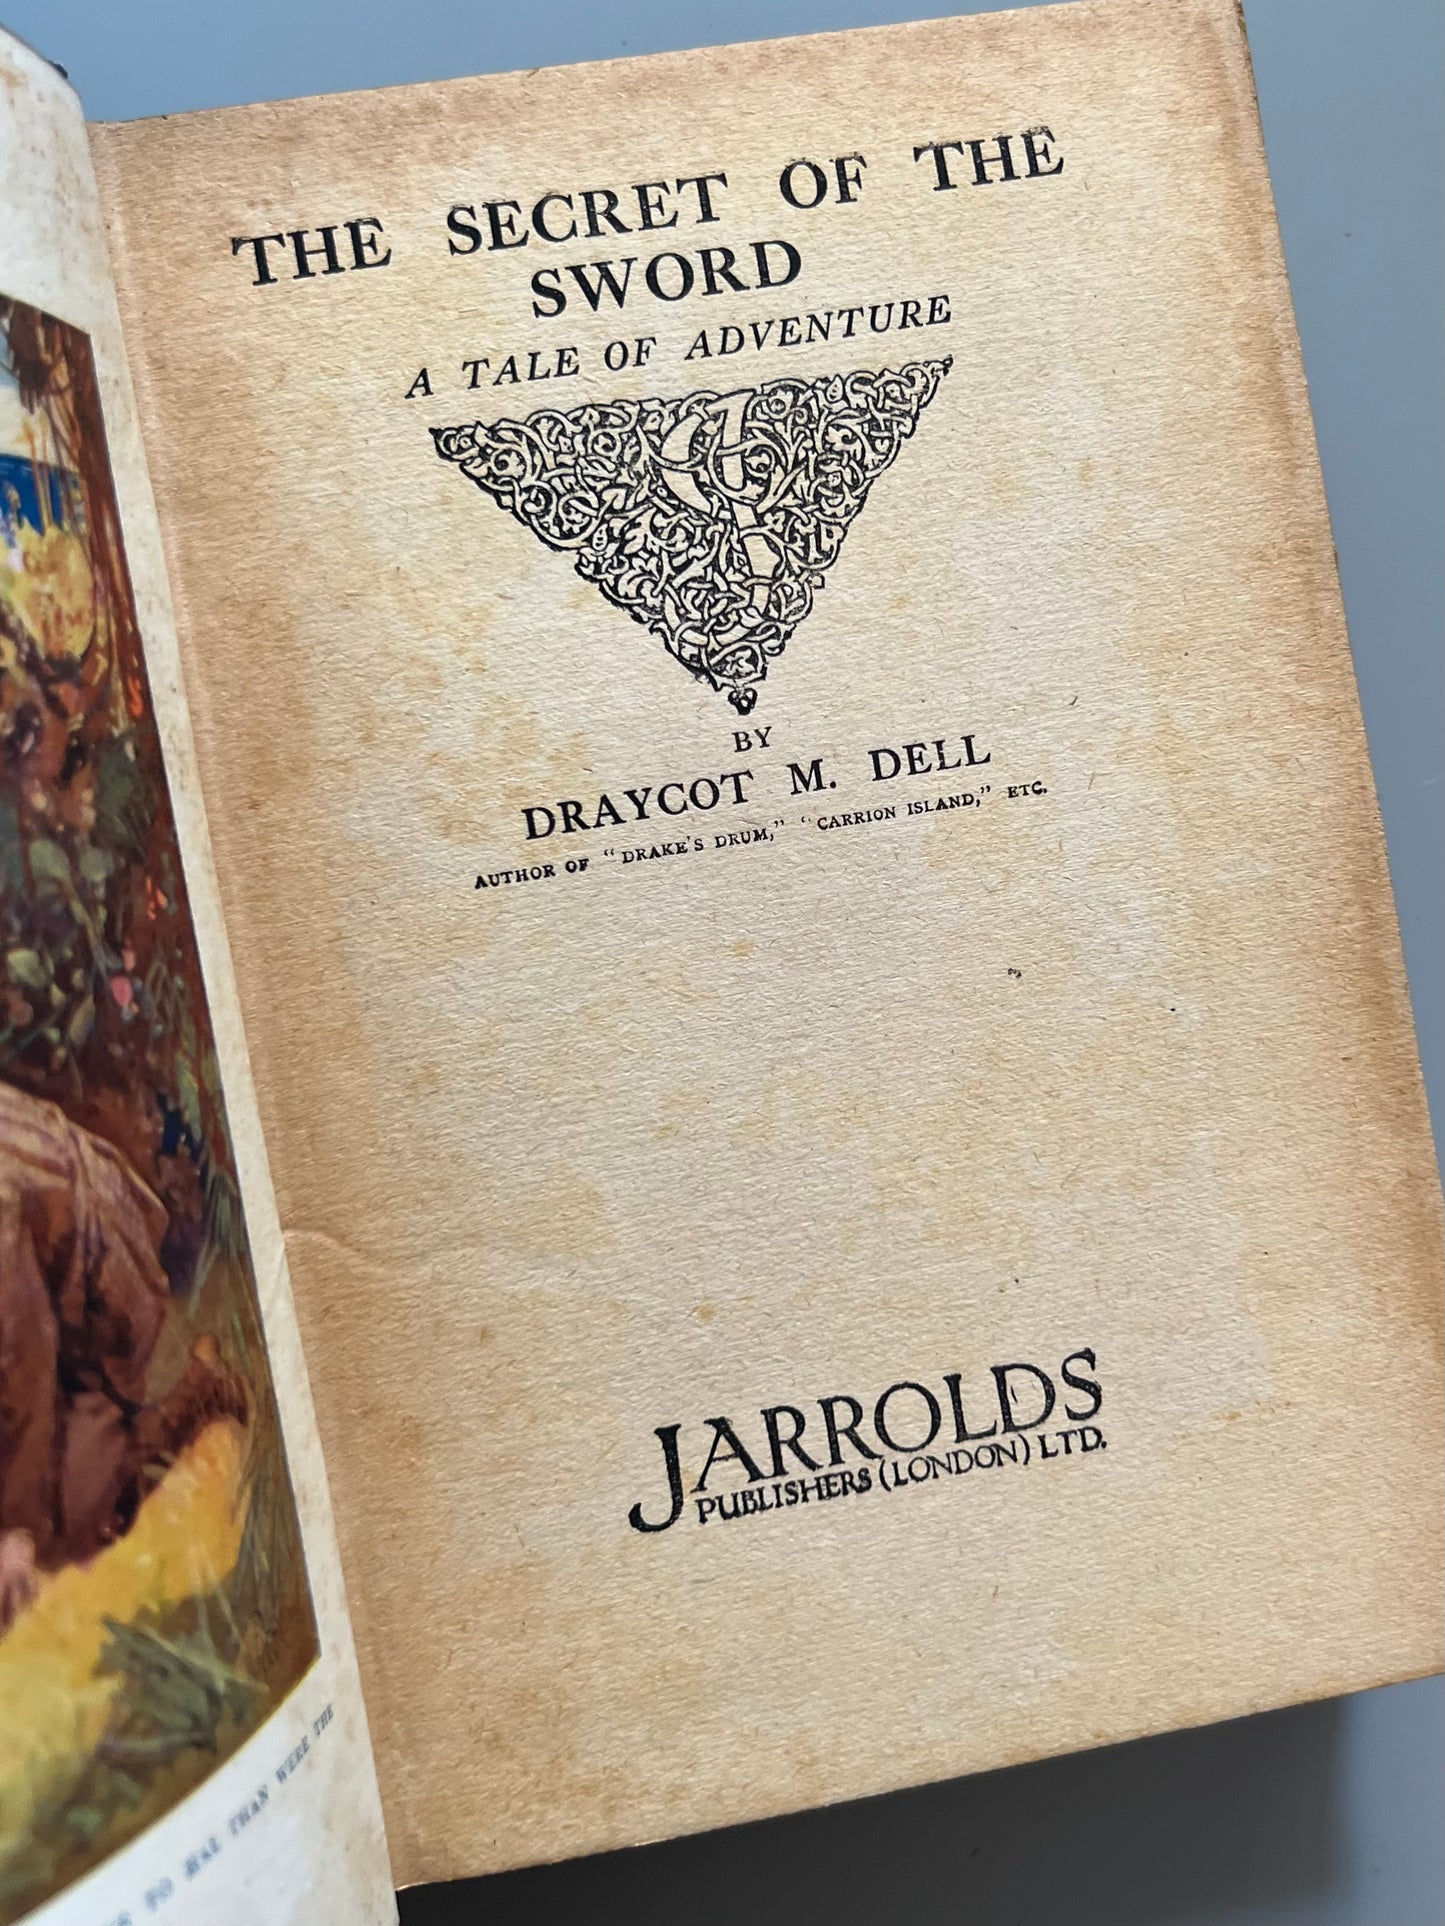 The secret of the sword, Draycot M. Dell - Jarrolds publishers, 1922